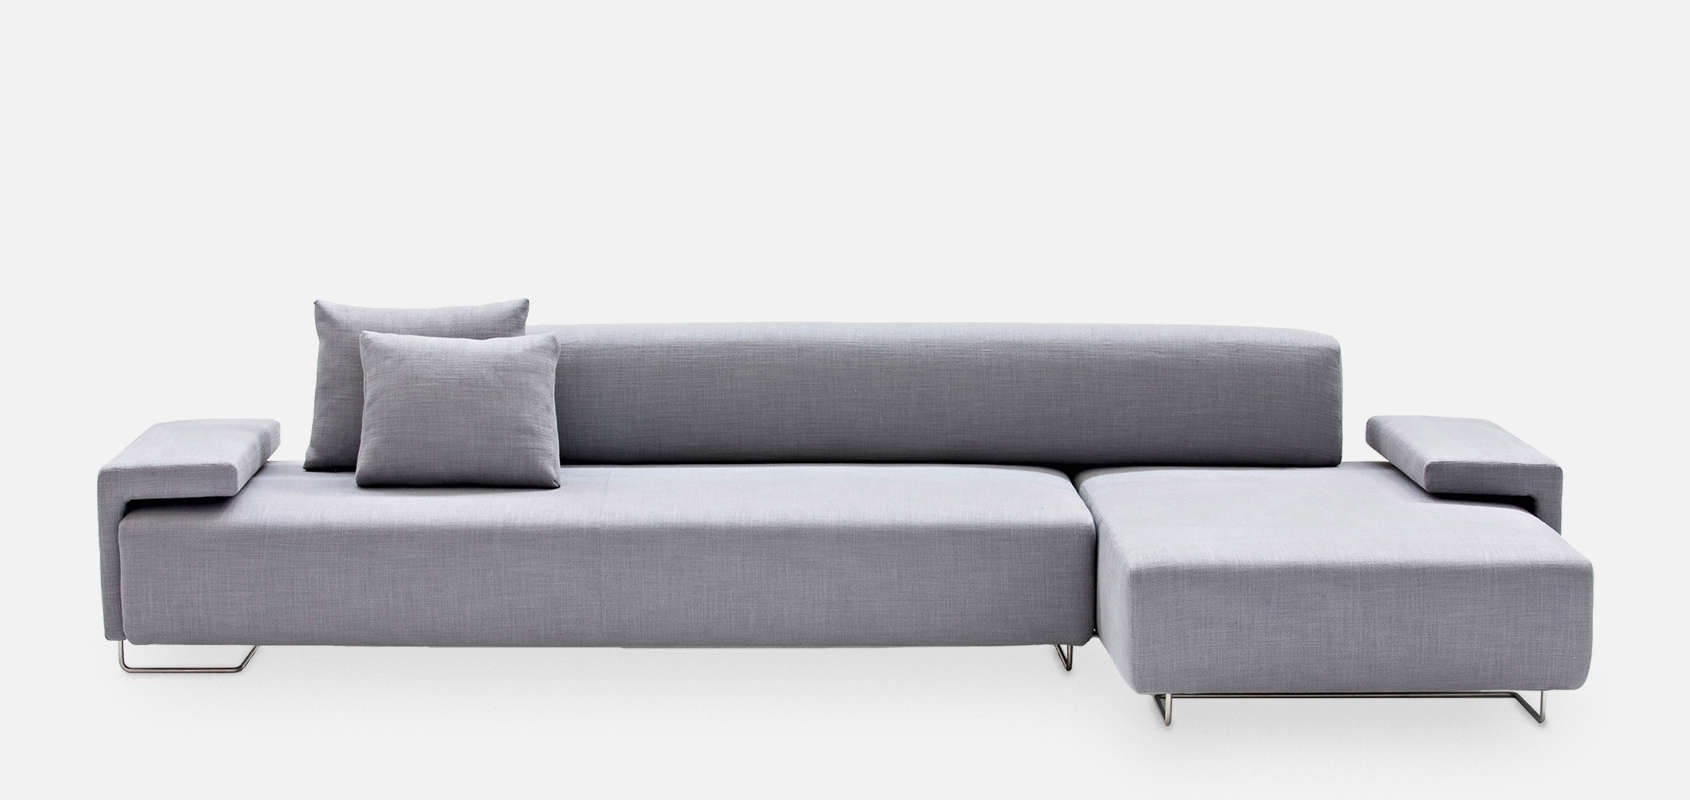 Lowland Sofa With Chaise